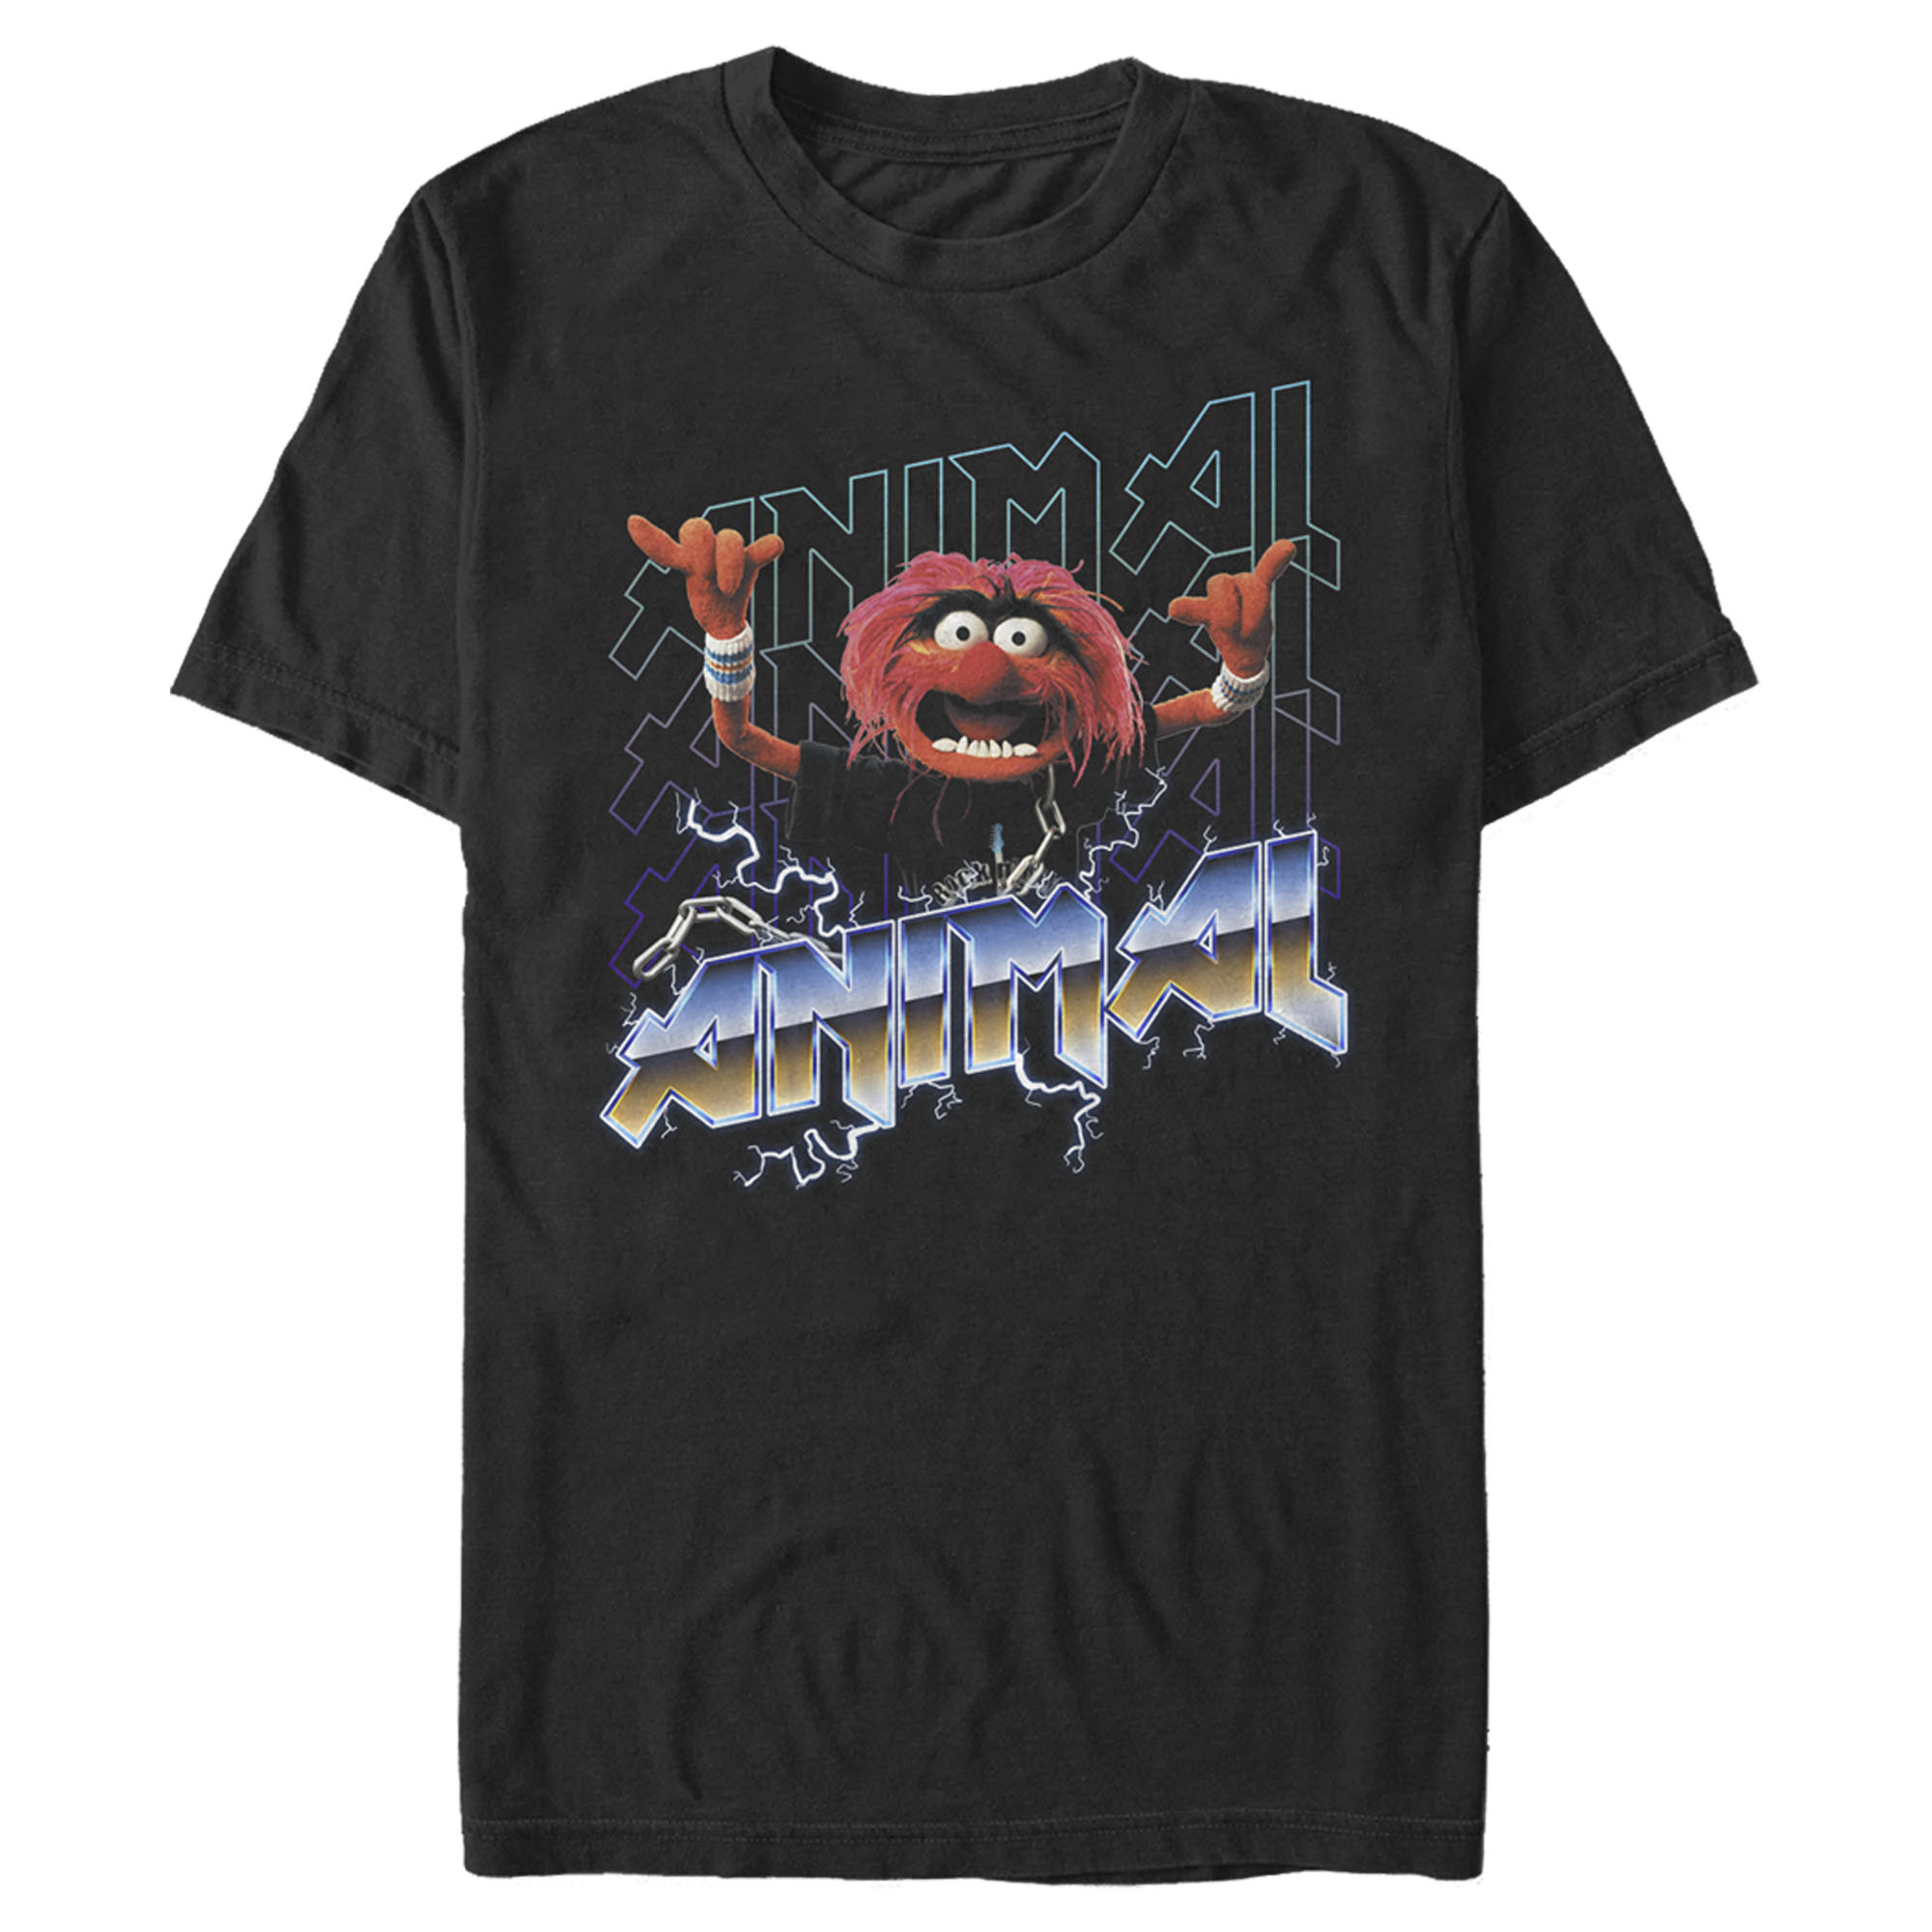 Men's The Muppets Animal Metal  Graphic Tee Black Large Tall - image 1 of 3